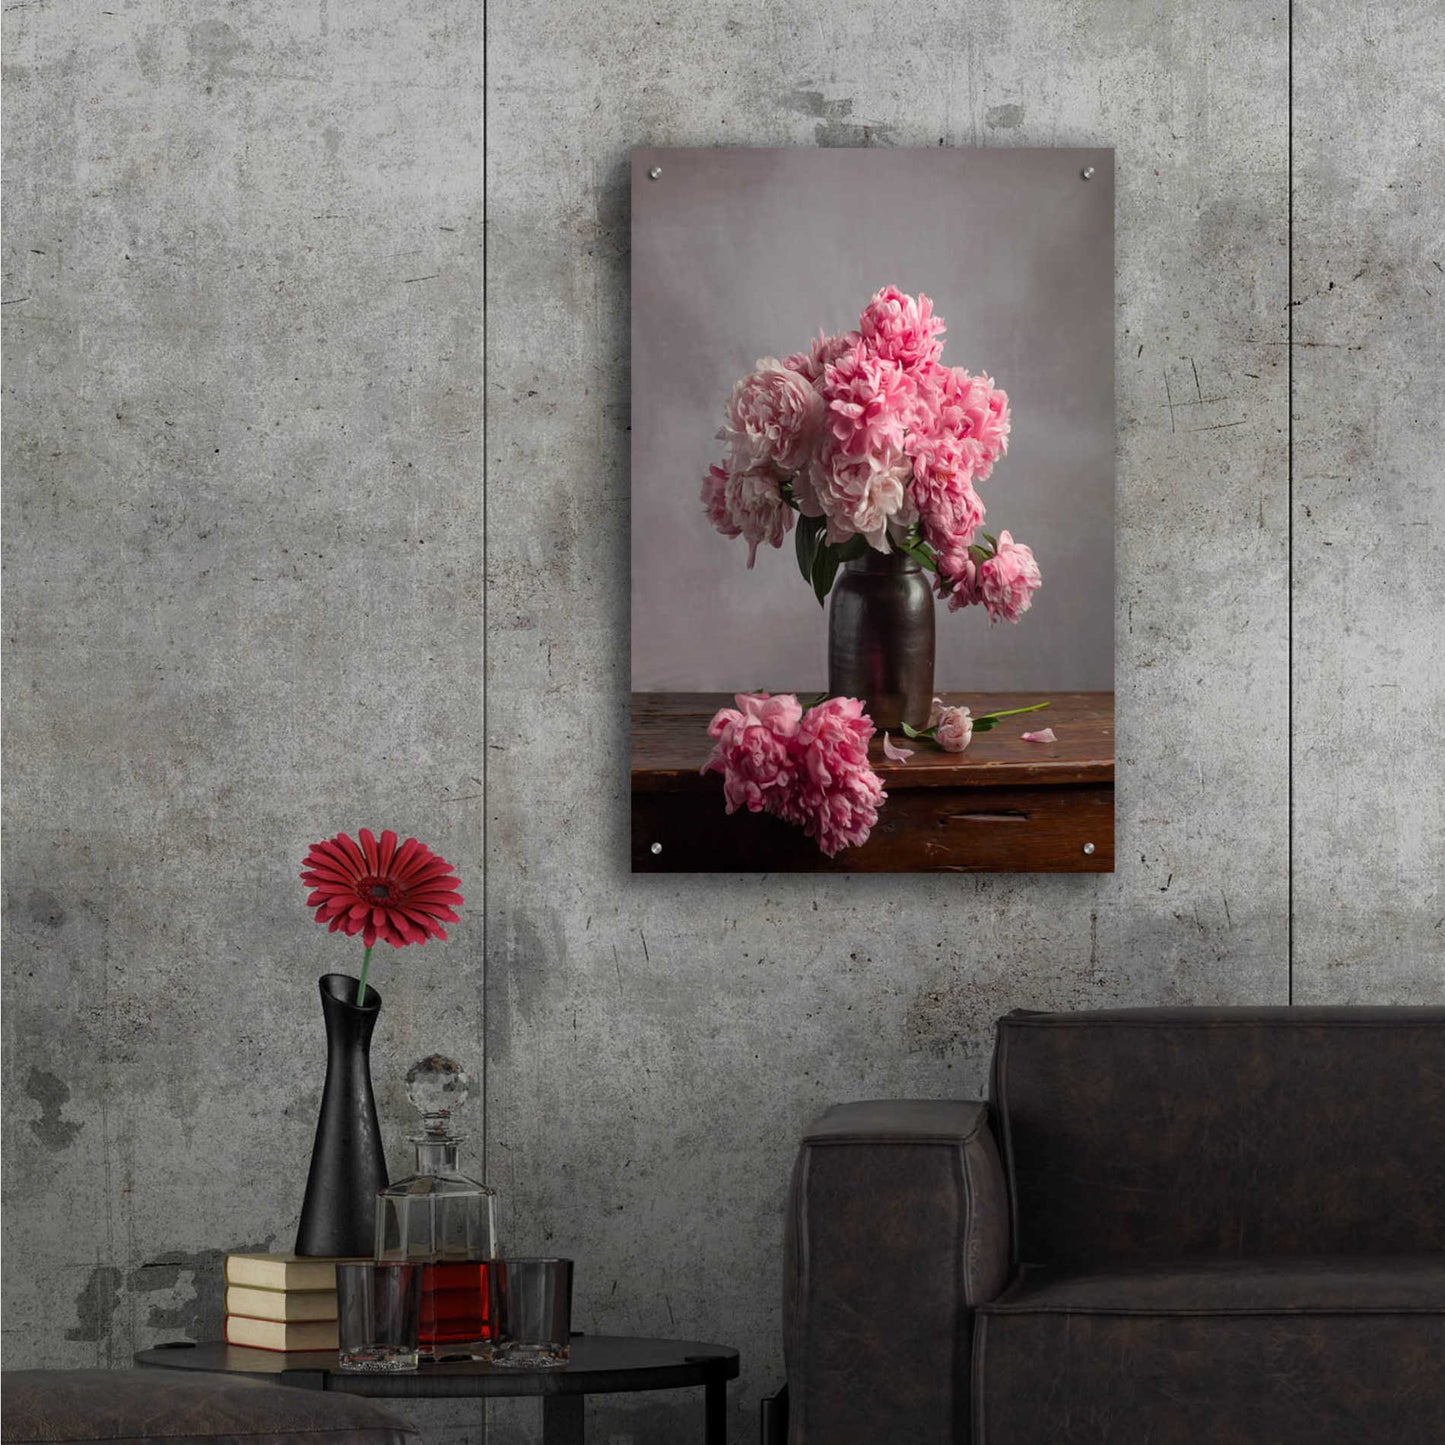 Epic Art 'Layers Of Pink' by Leah McLean Acrylic Glass Wall Art,24x36